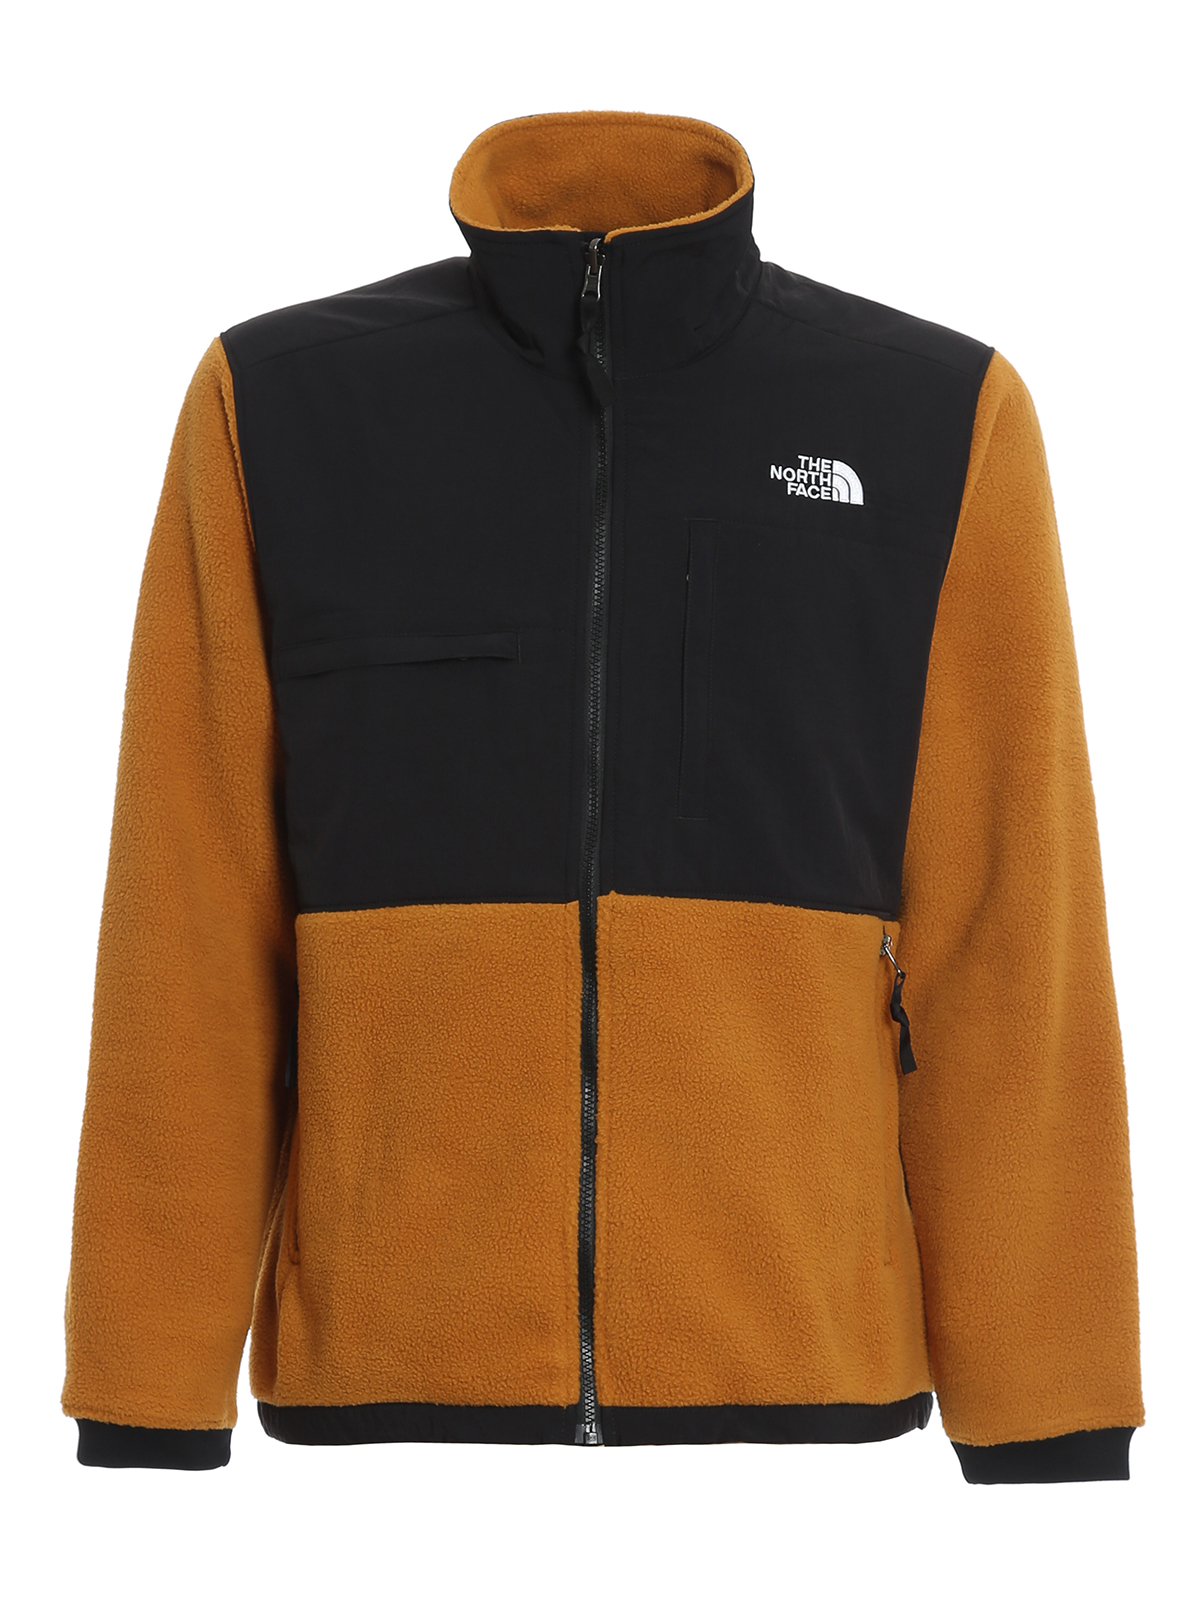 casual north face jacket